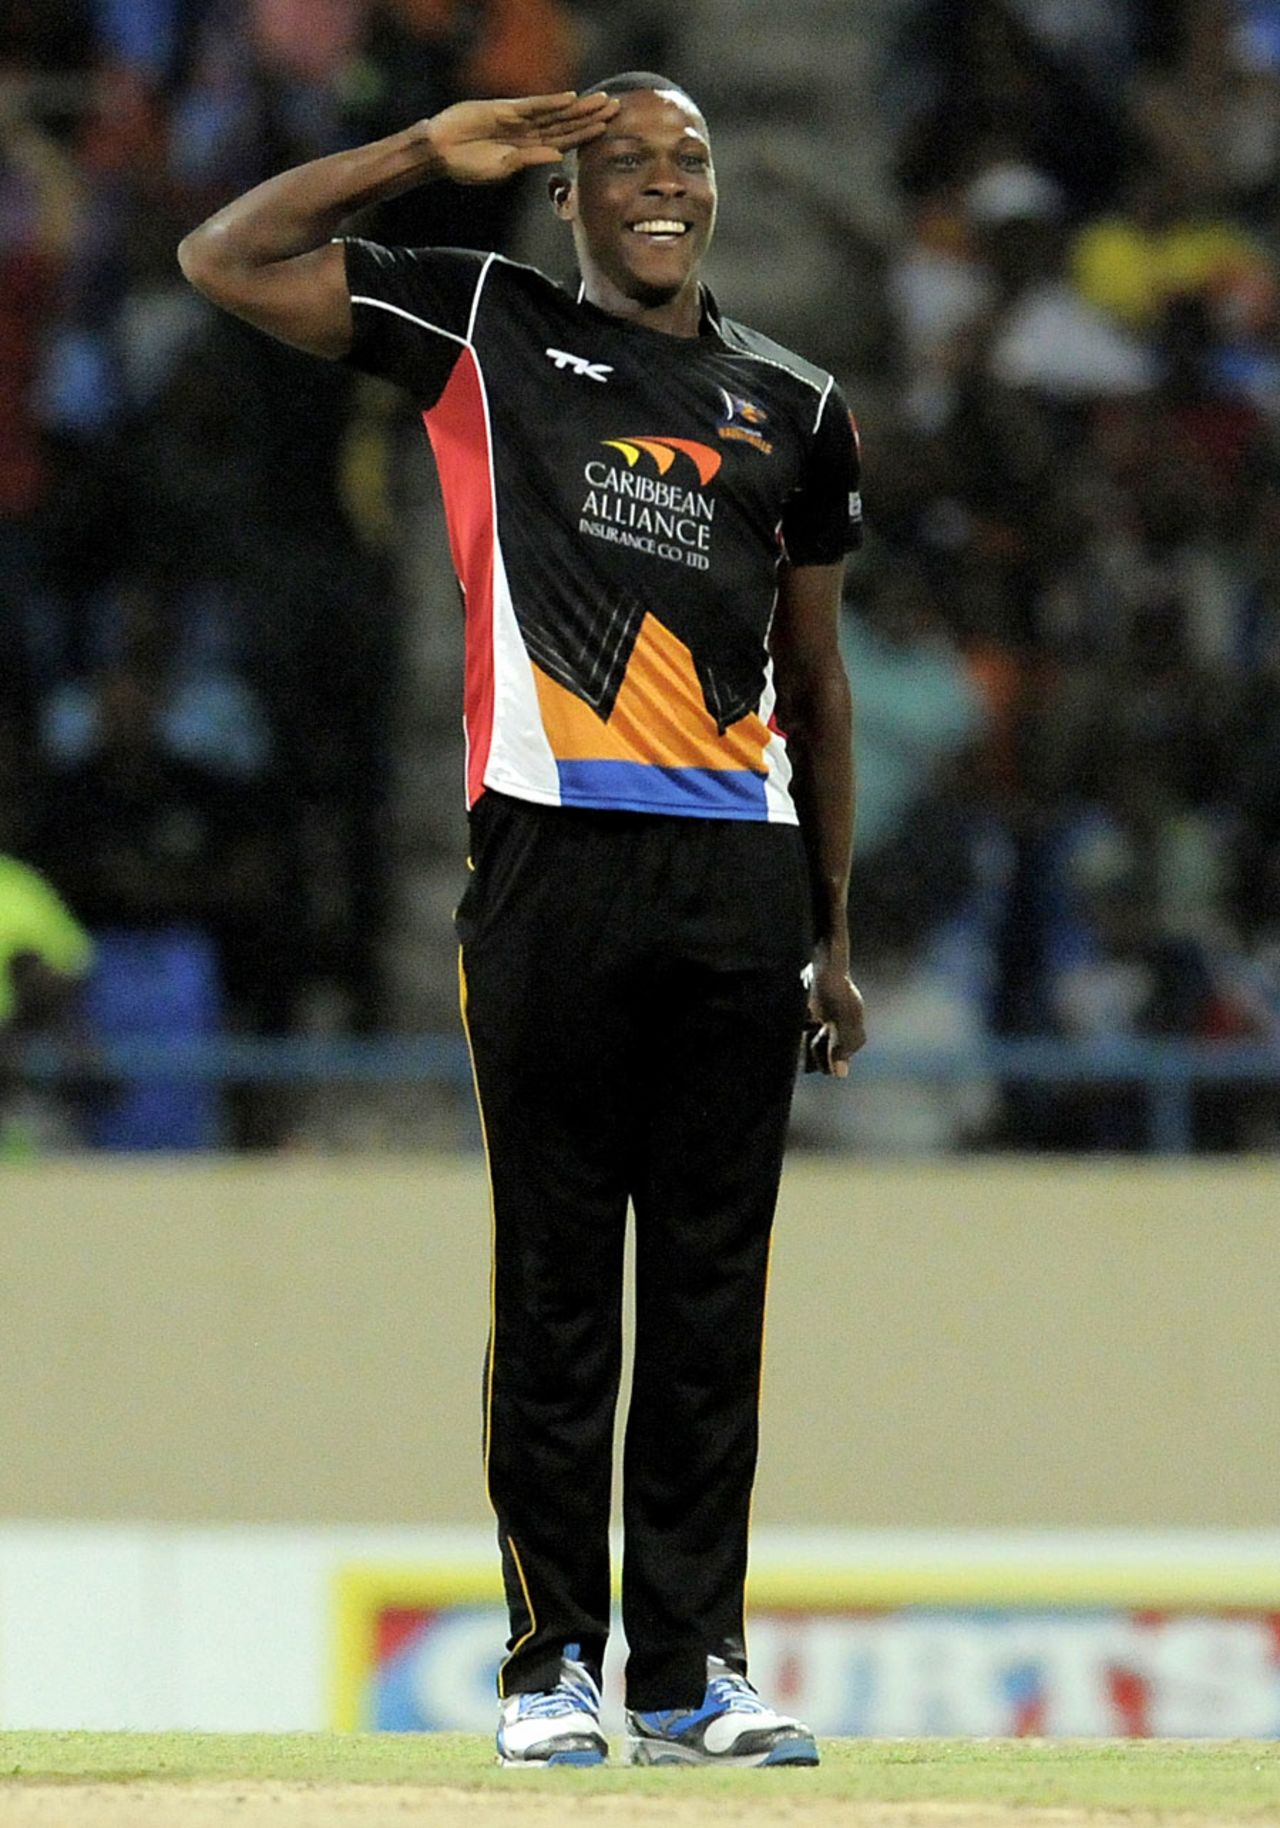 Sheldon Cotterrell salutes the crowd after taking a wicket, Antigua Hawksbills v Barbados Tridents, CPL, North Sound, August 13, 2013